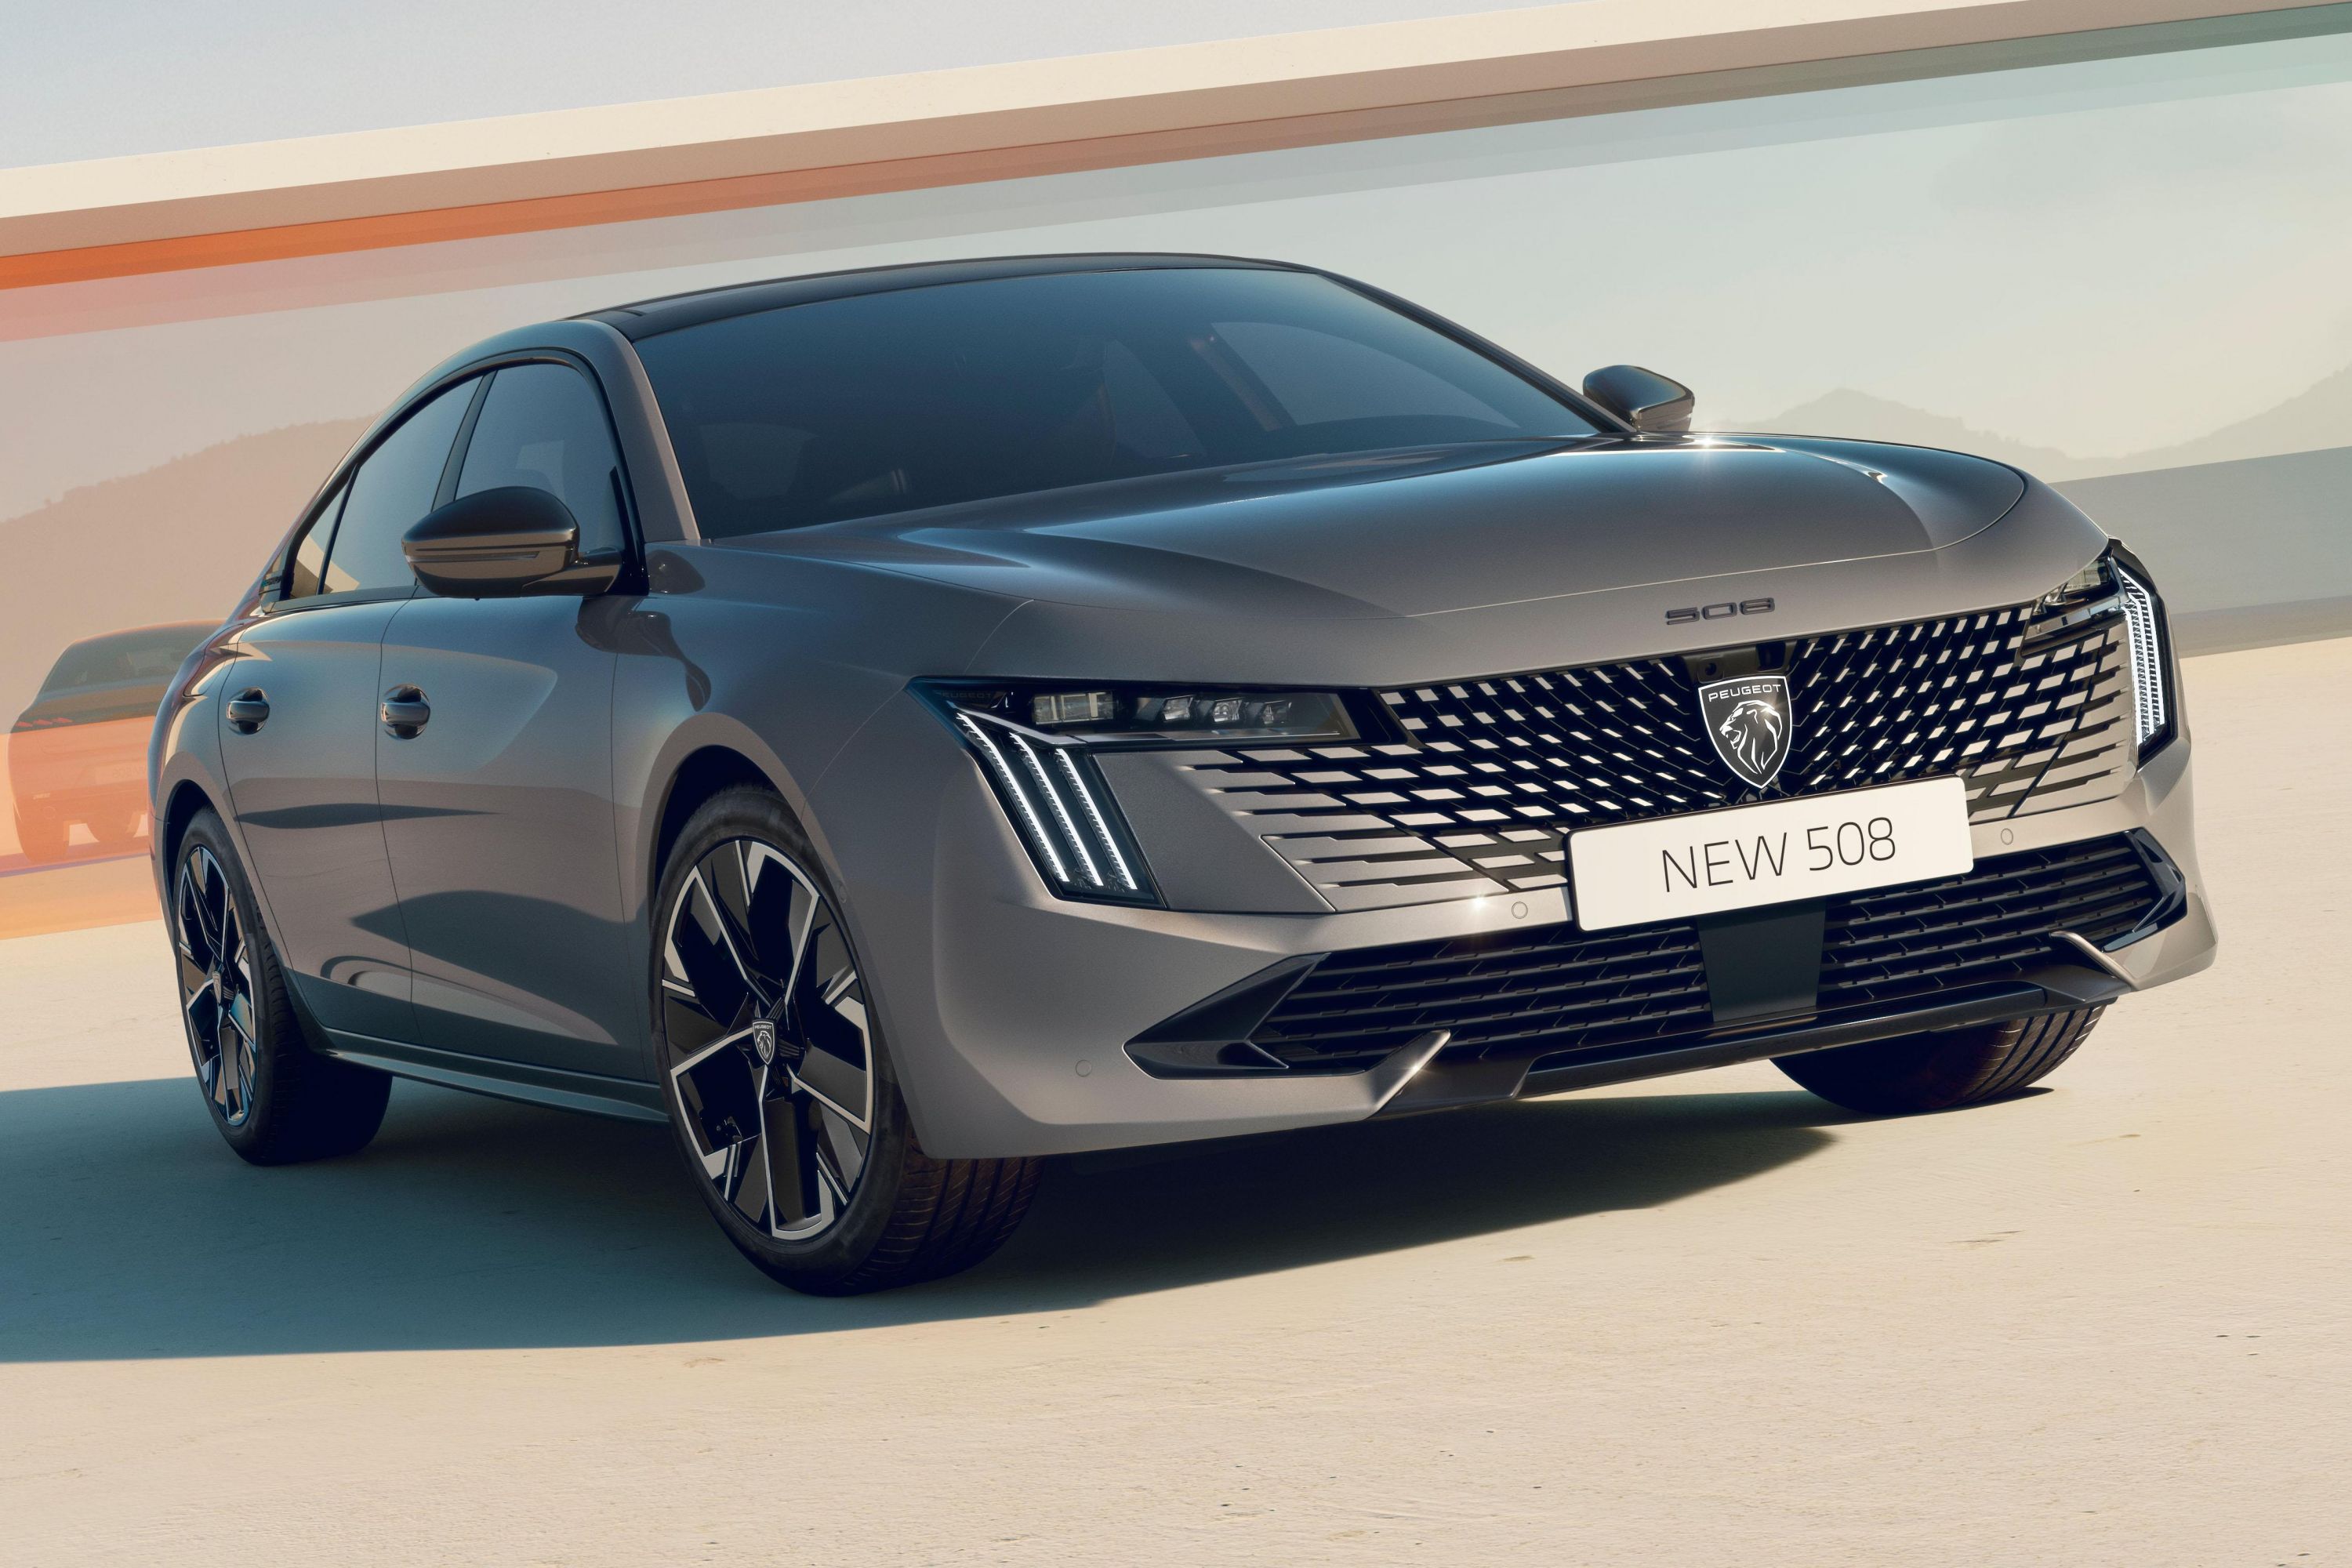 2020 Peugeot 508 Sport Engineered unveiled – BMW 3-series rival